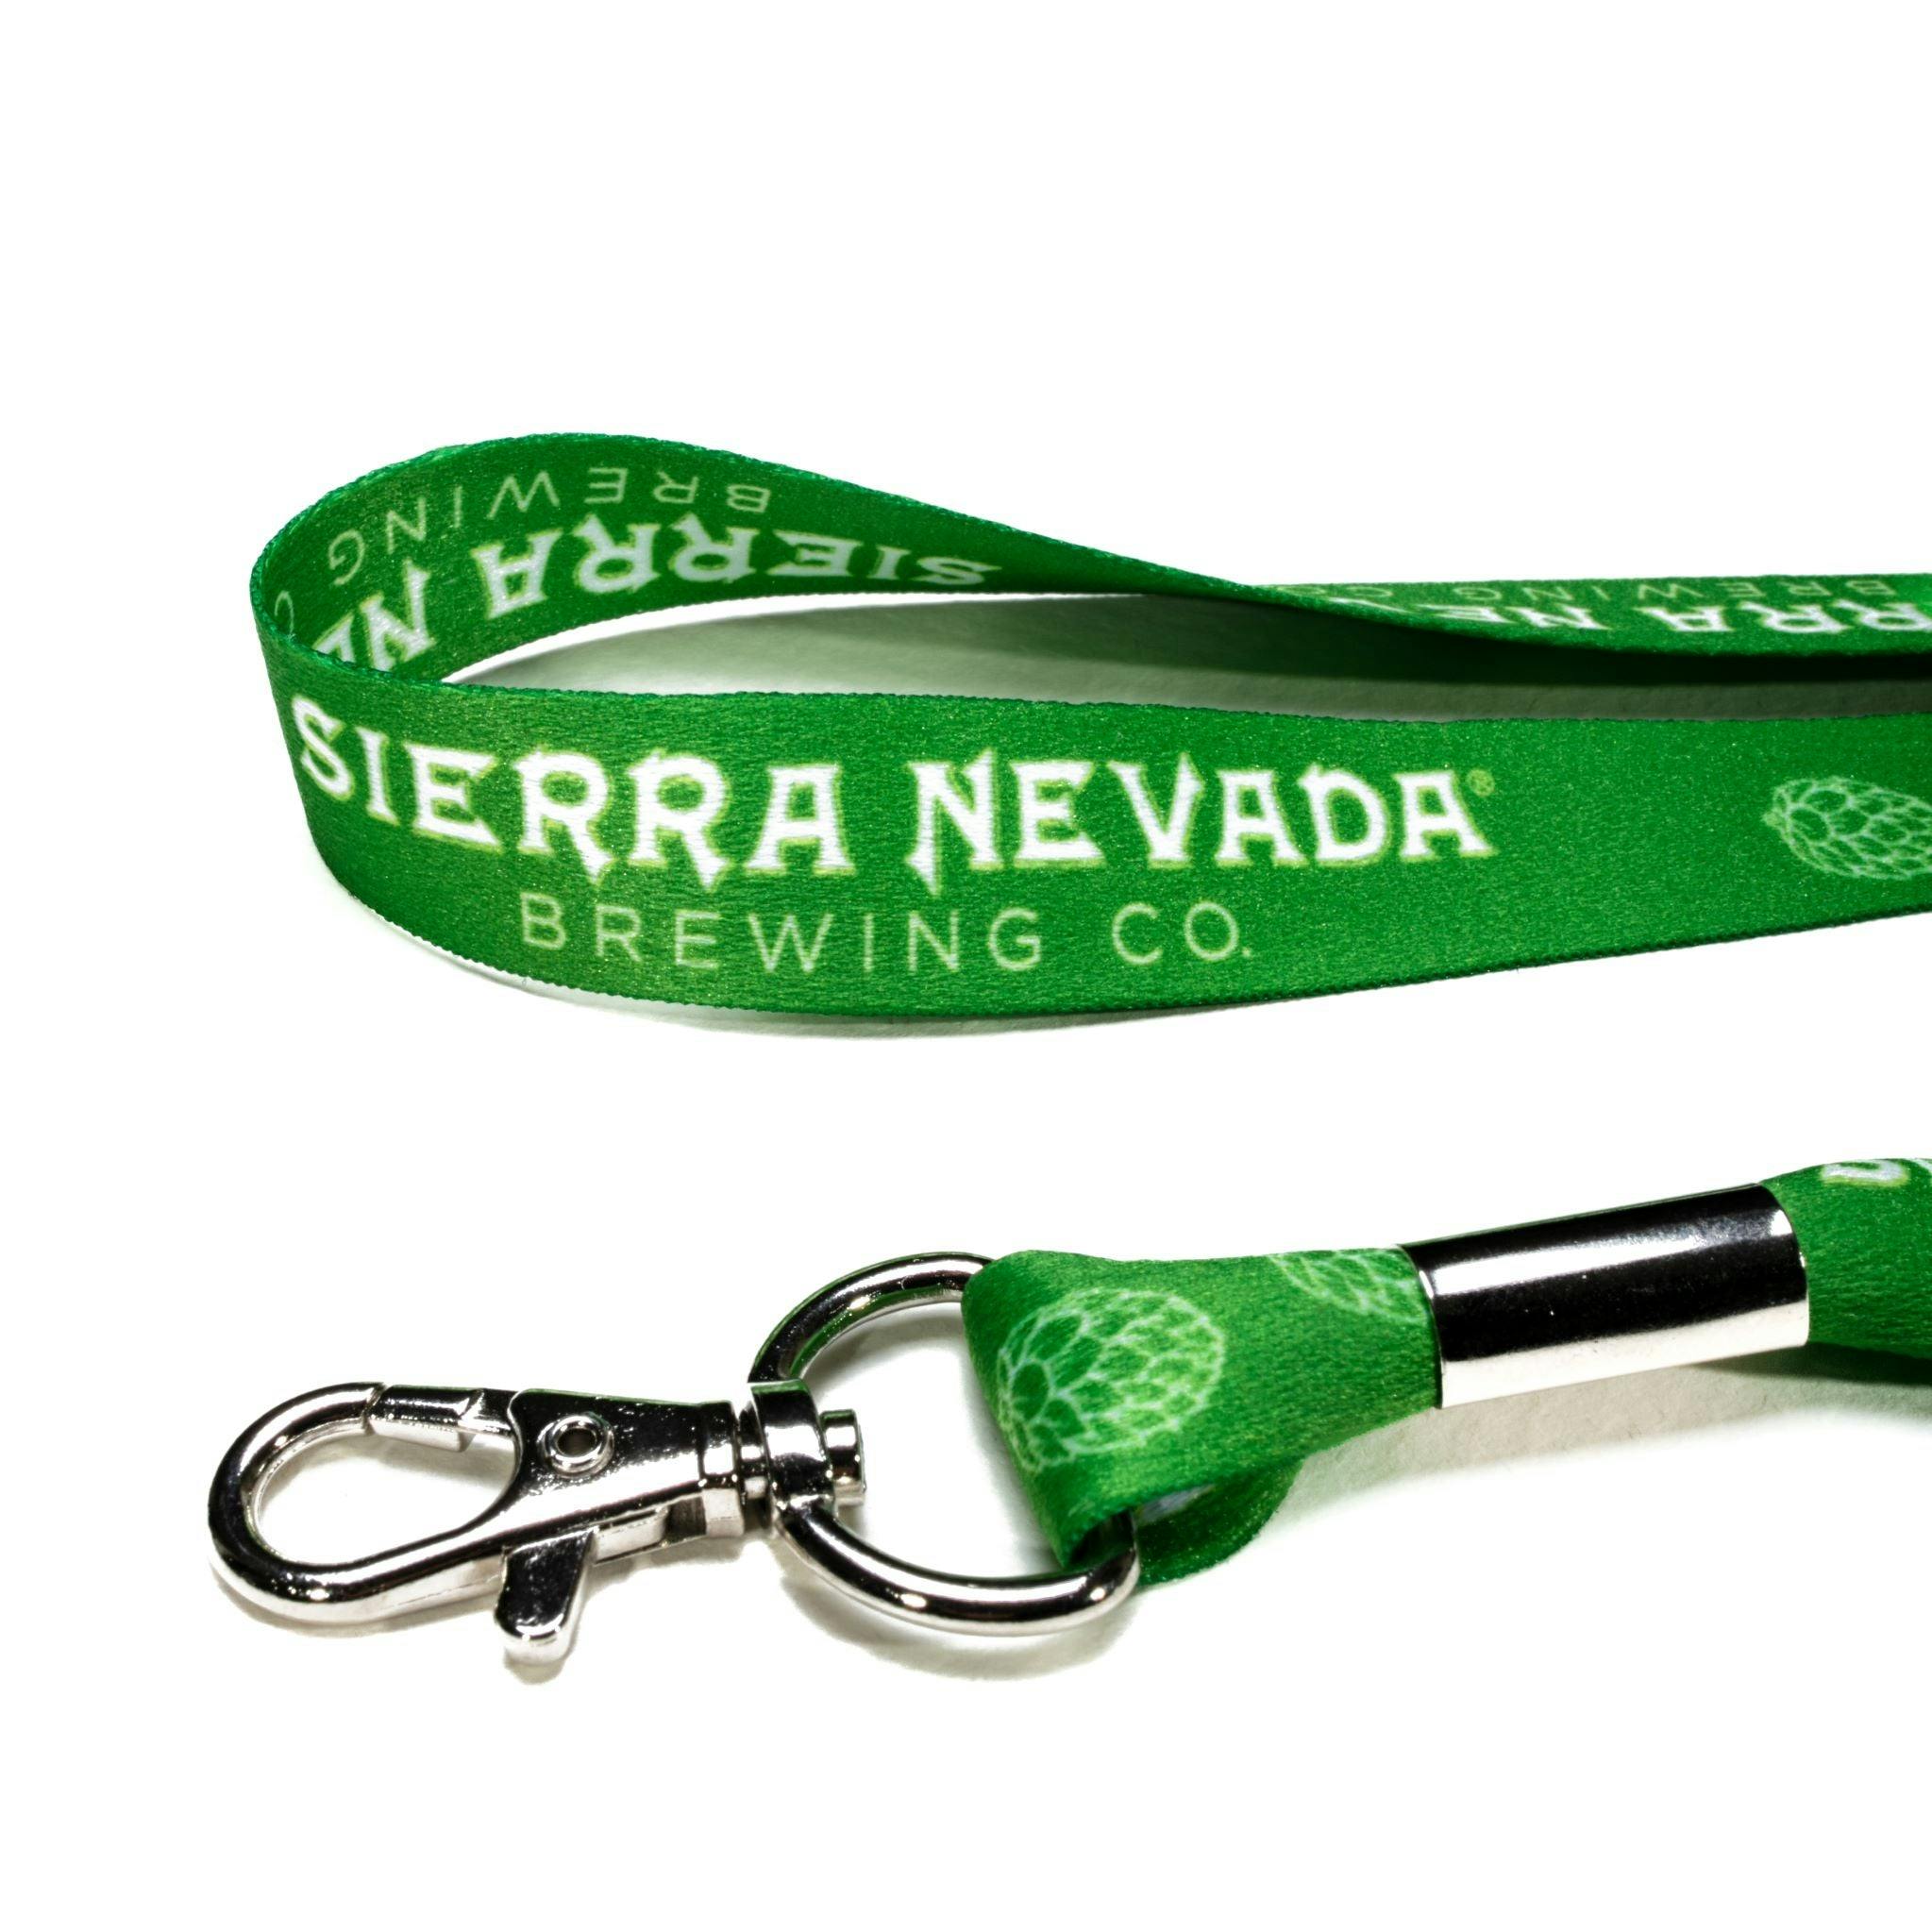 Sierra Nevada Brewing Co. lanyard - close-up shot of the printed Sierra Nevada lanyard on the fabric and the silver key clip